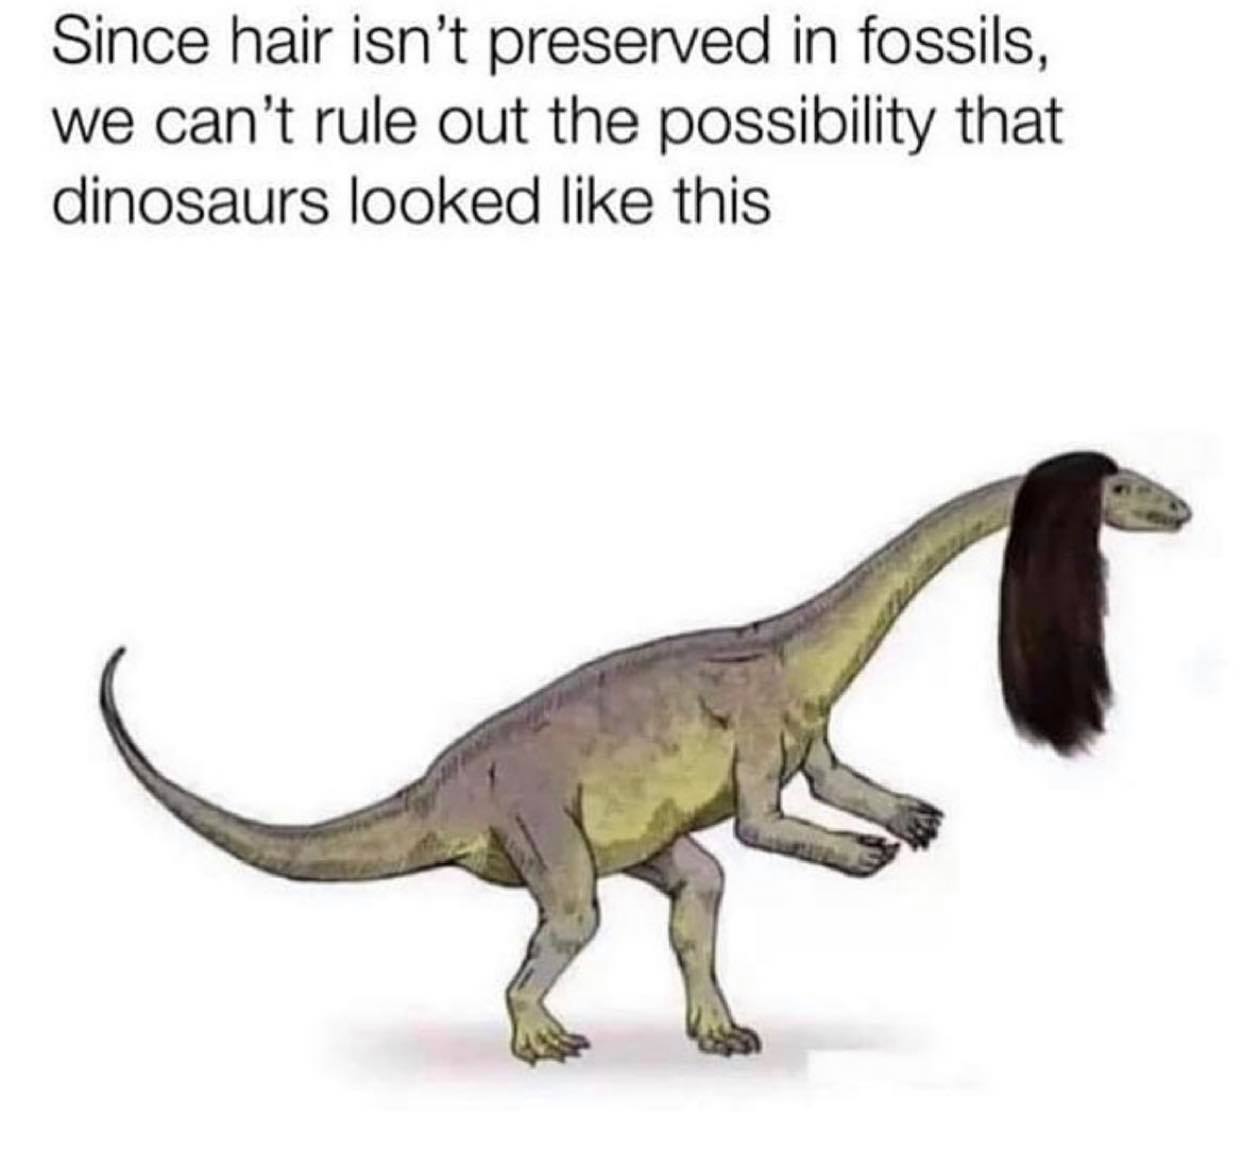 crazy realizations - since hair can t be preserved in fossils - Since hair isn't preserved in fossils, we can't rule out the possibility that dinosaurs looked this